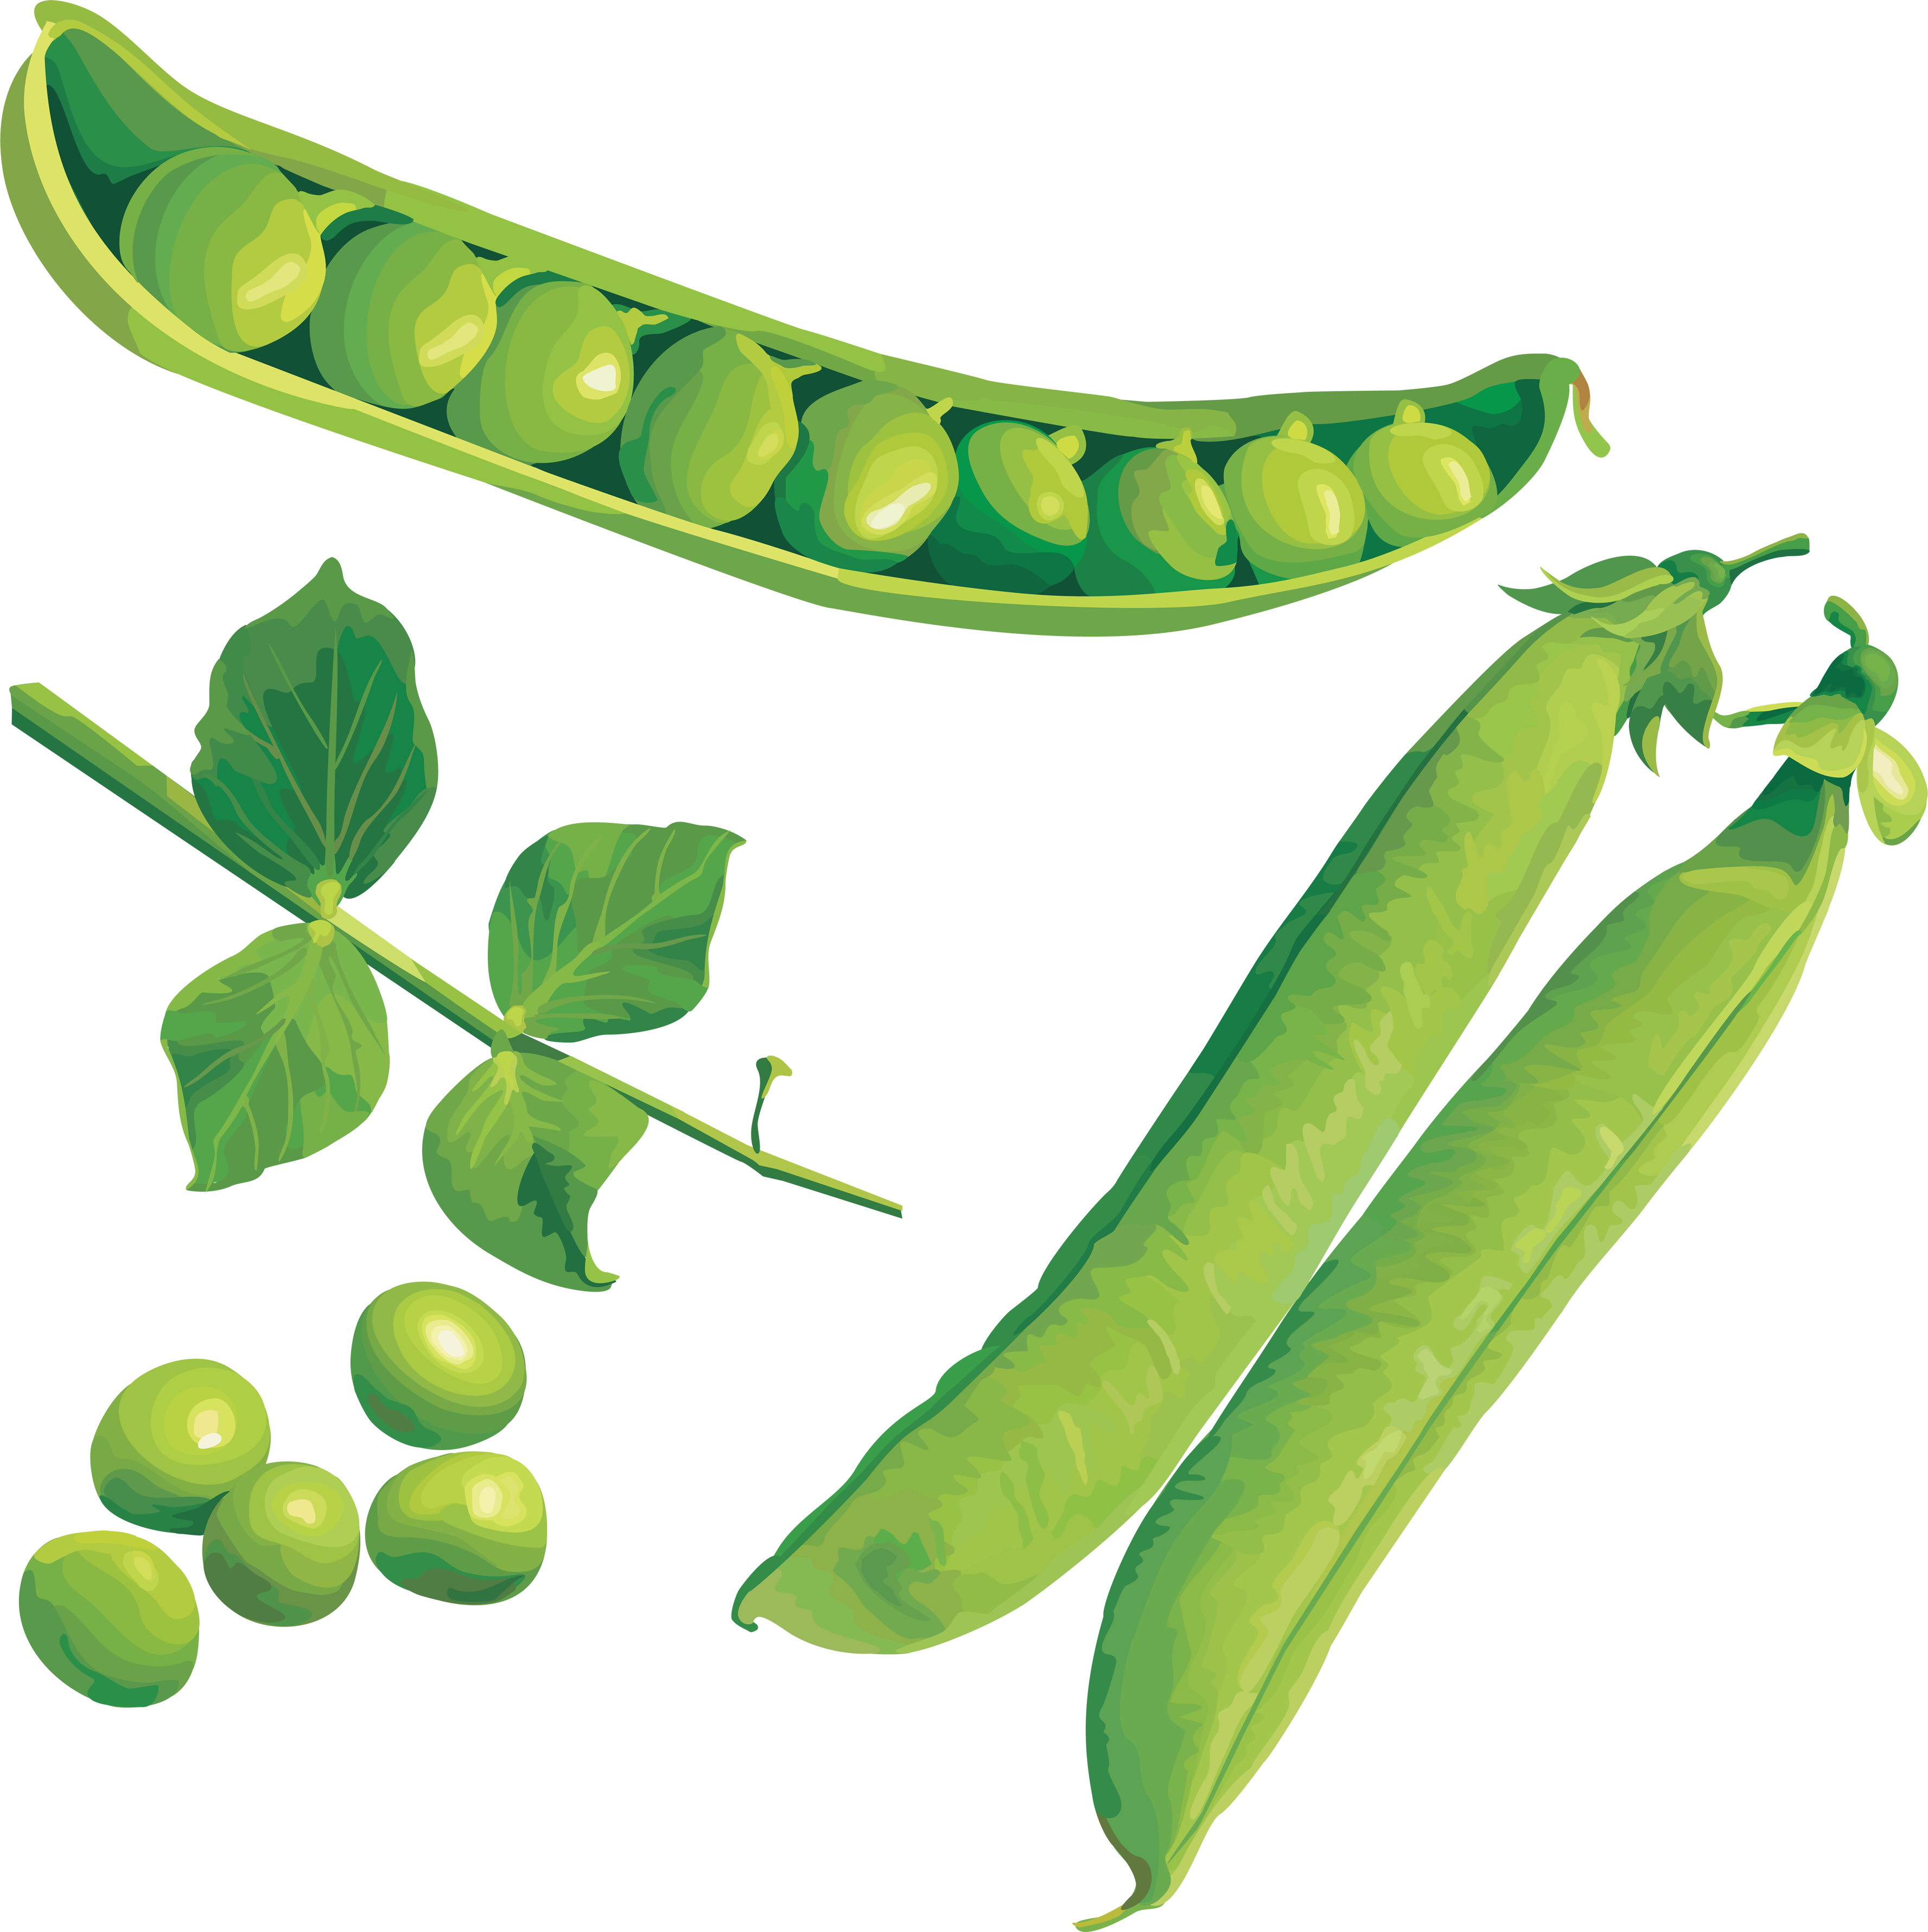 Pea Background PNG Image